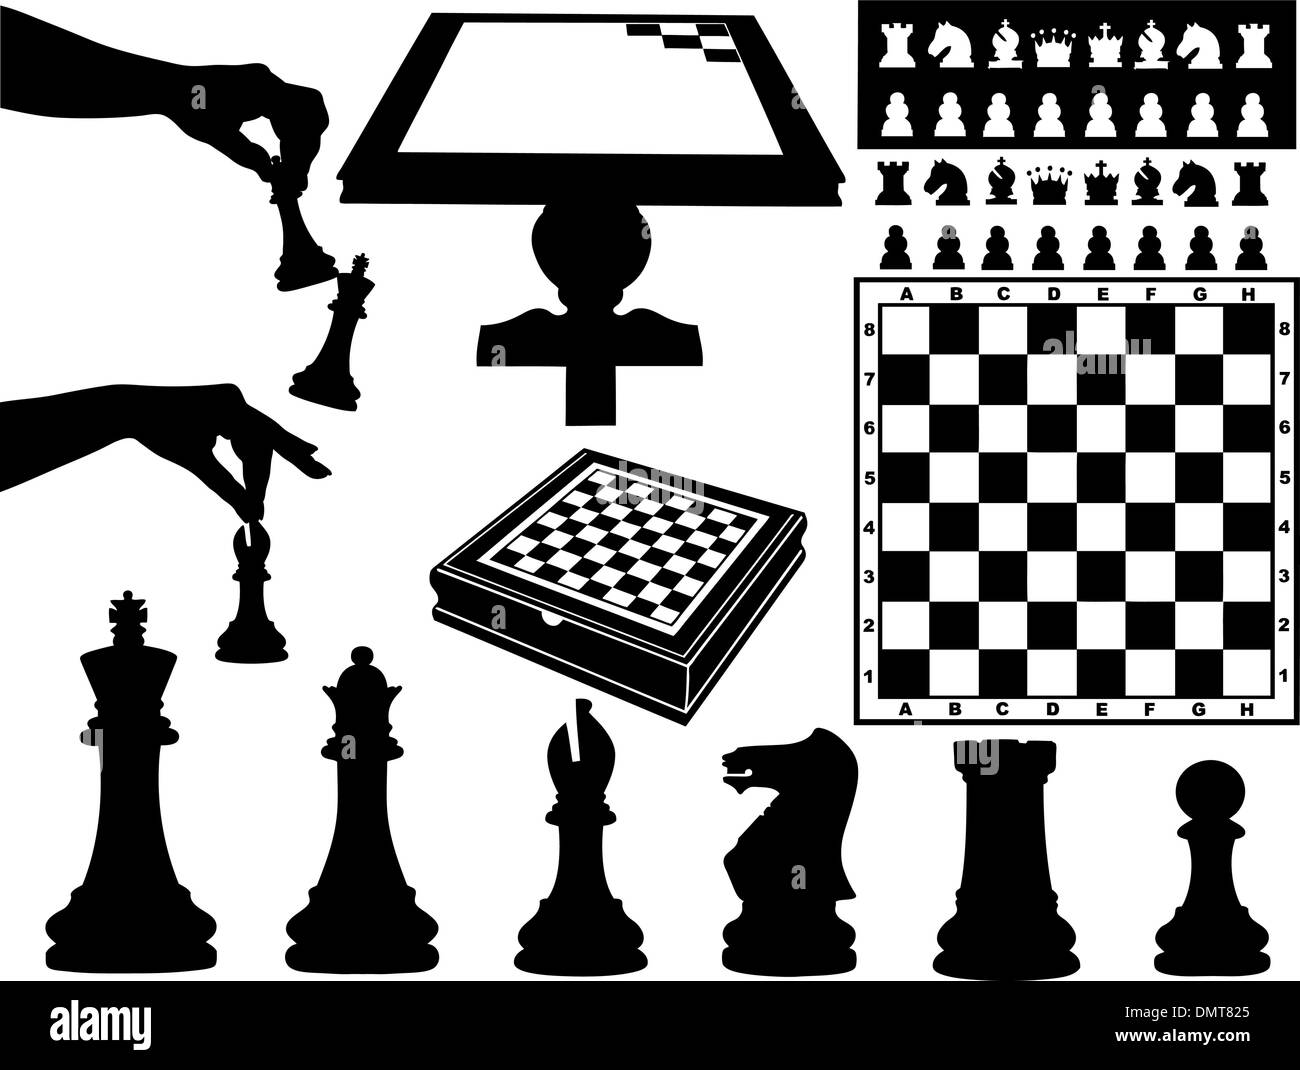 Illustration of chess pieces Stock Vector